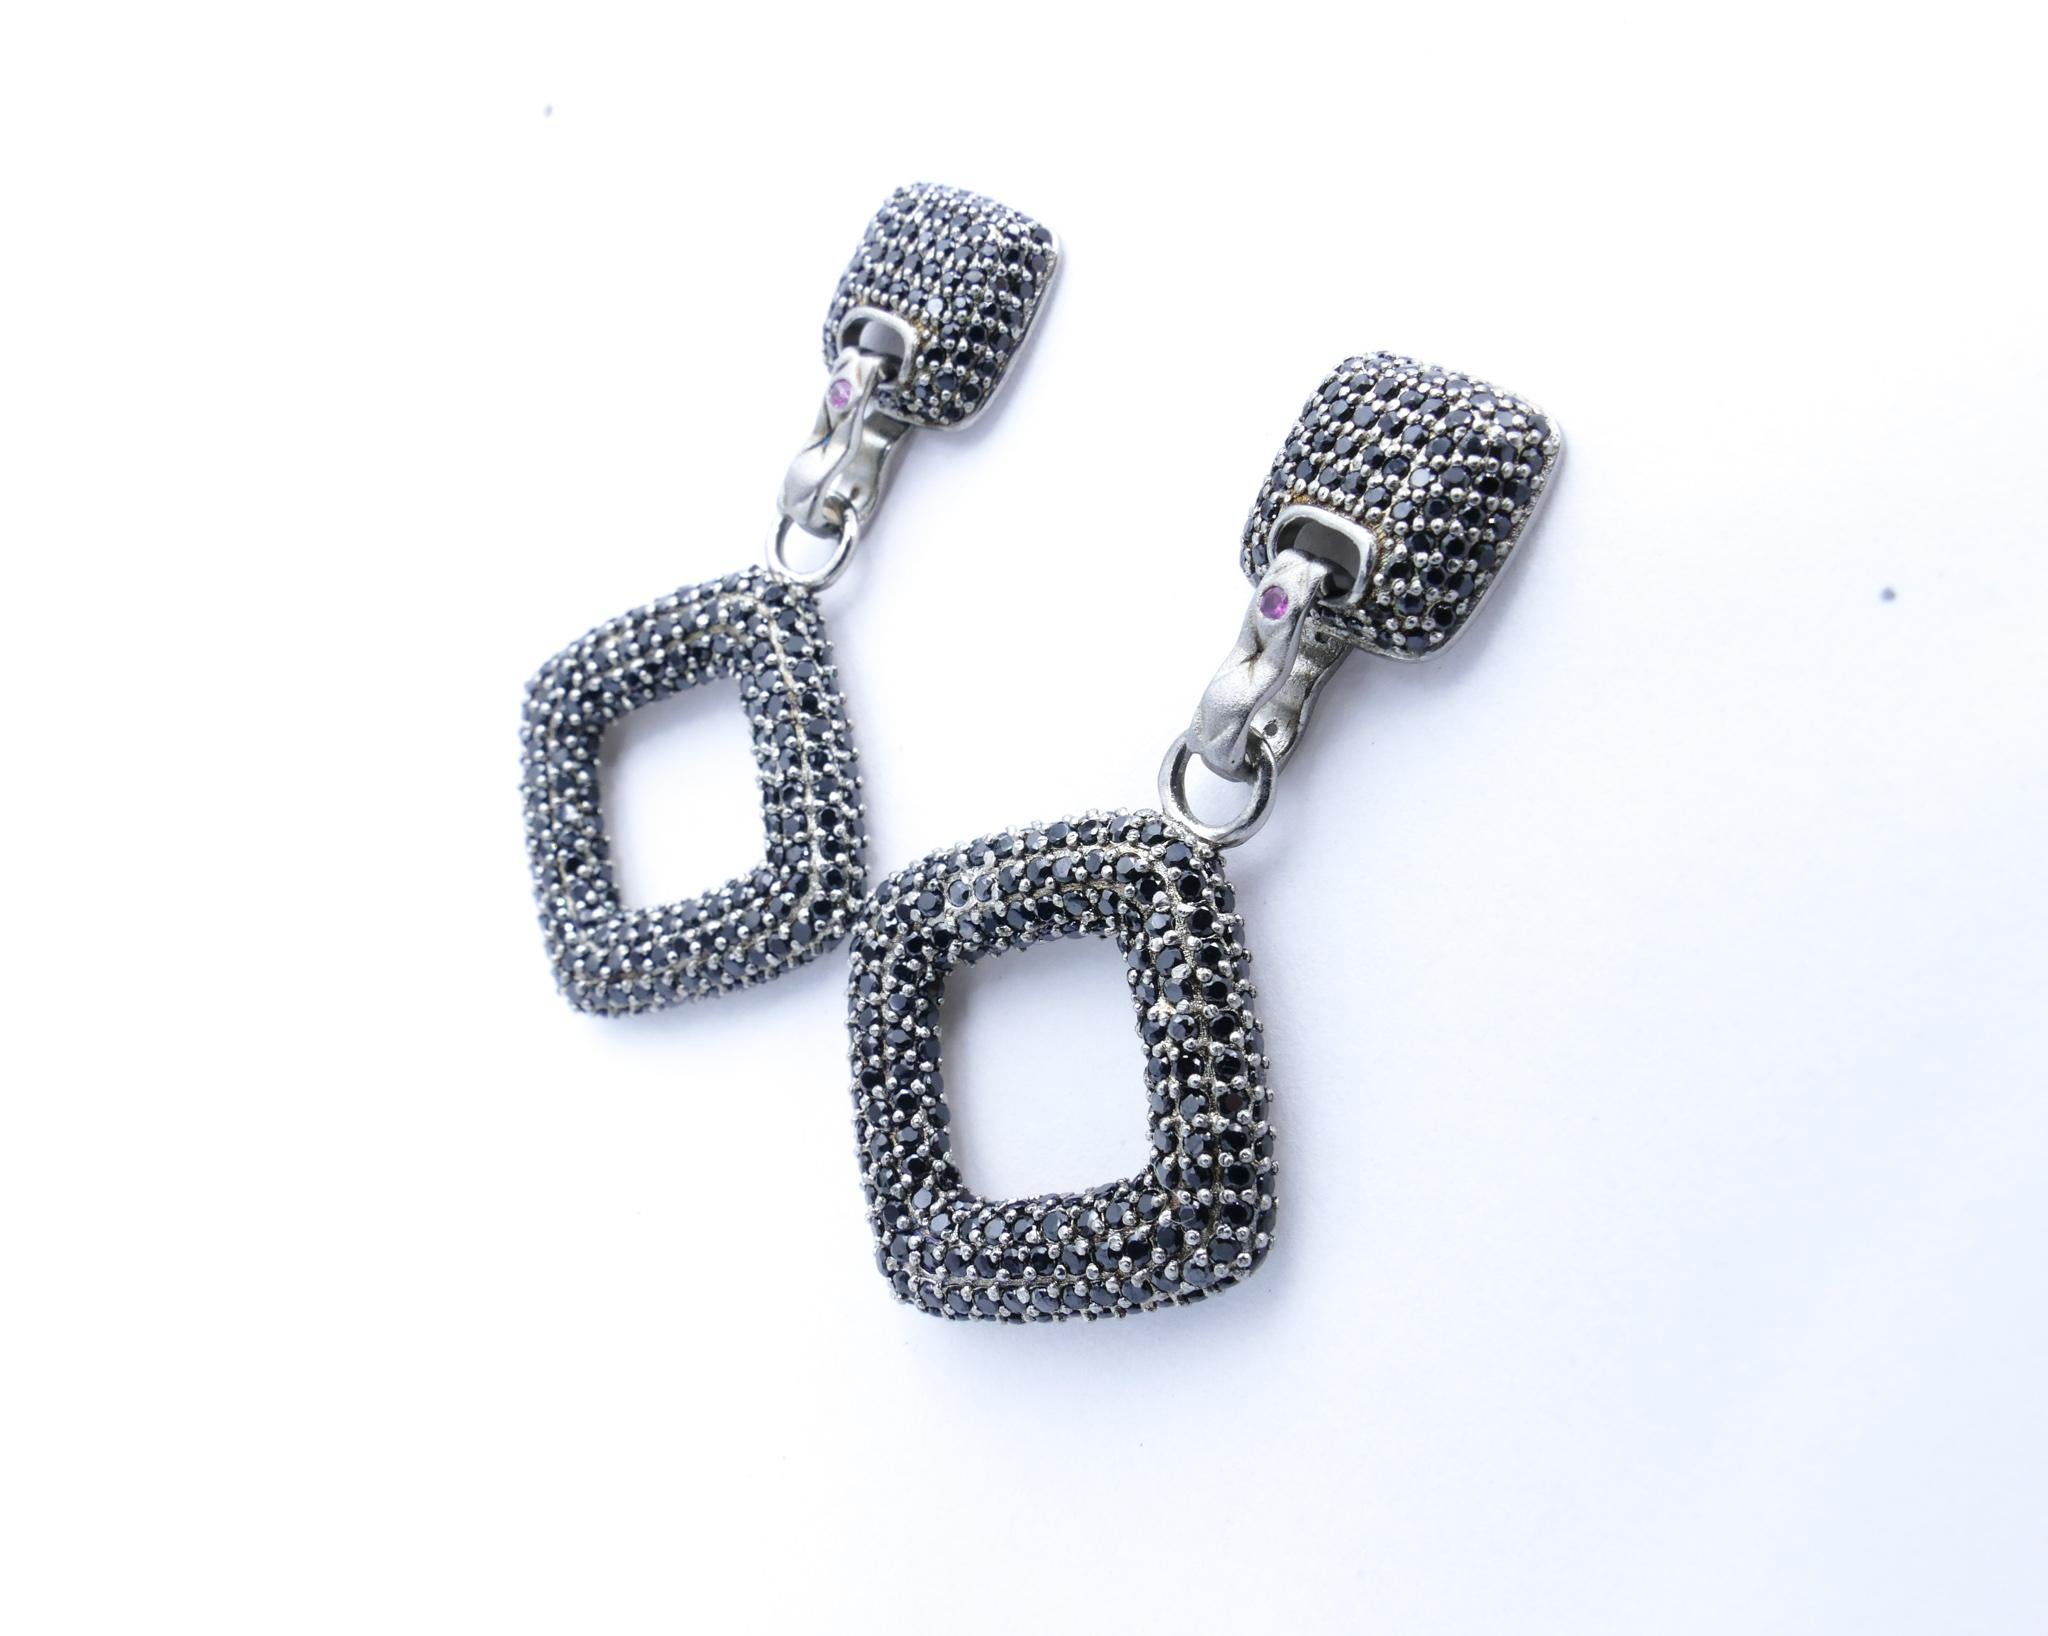 Set in Sterling Silver these Designer Earrings are so so smart. And very eye-catching.
Great for evening wear but smart even with a pair of jeans.
Designed pave style with hanging diamond shape squares at the bottom composed of glittery black Spinel